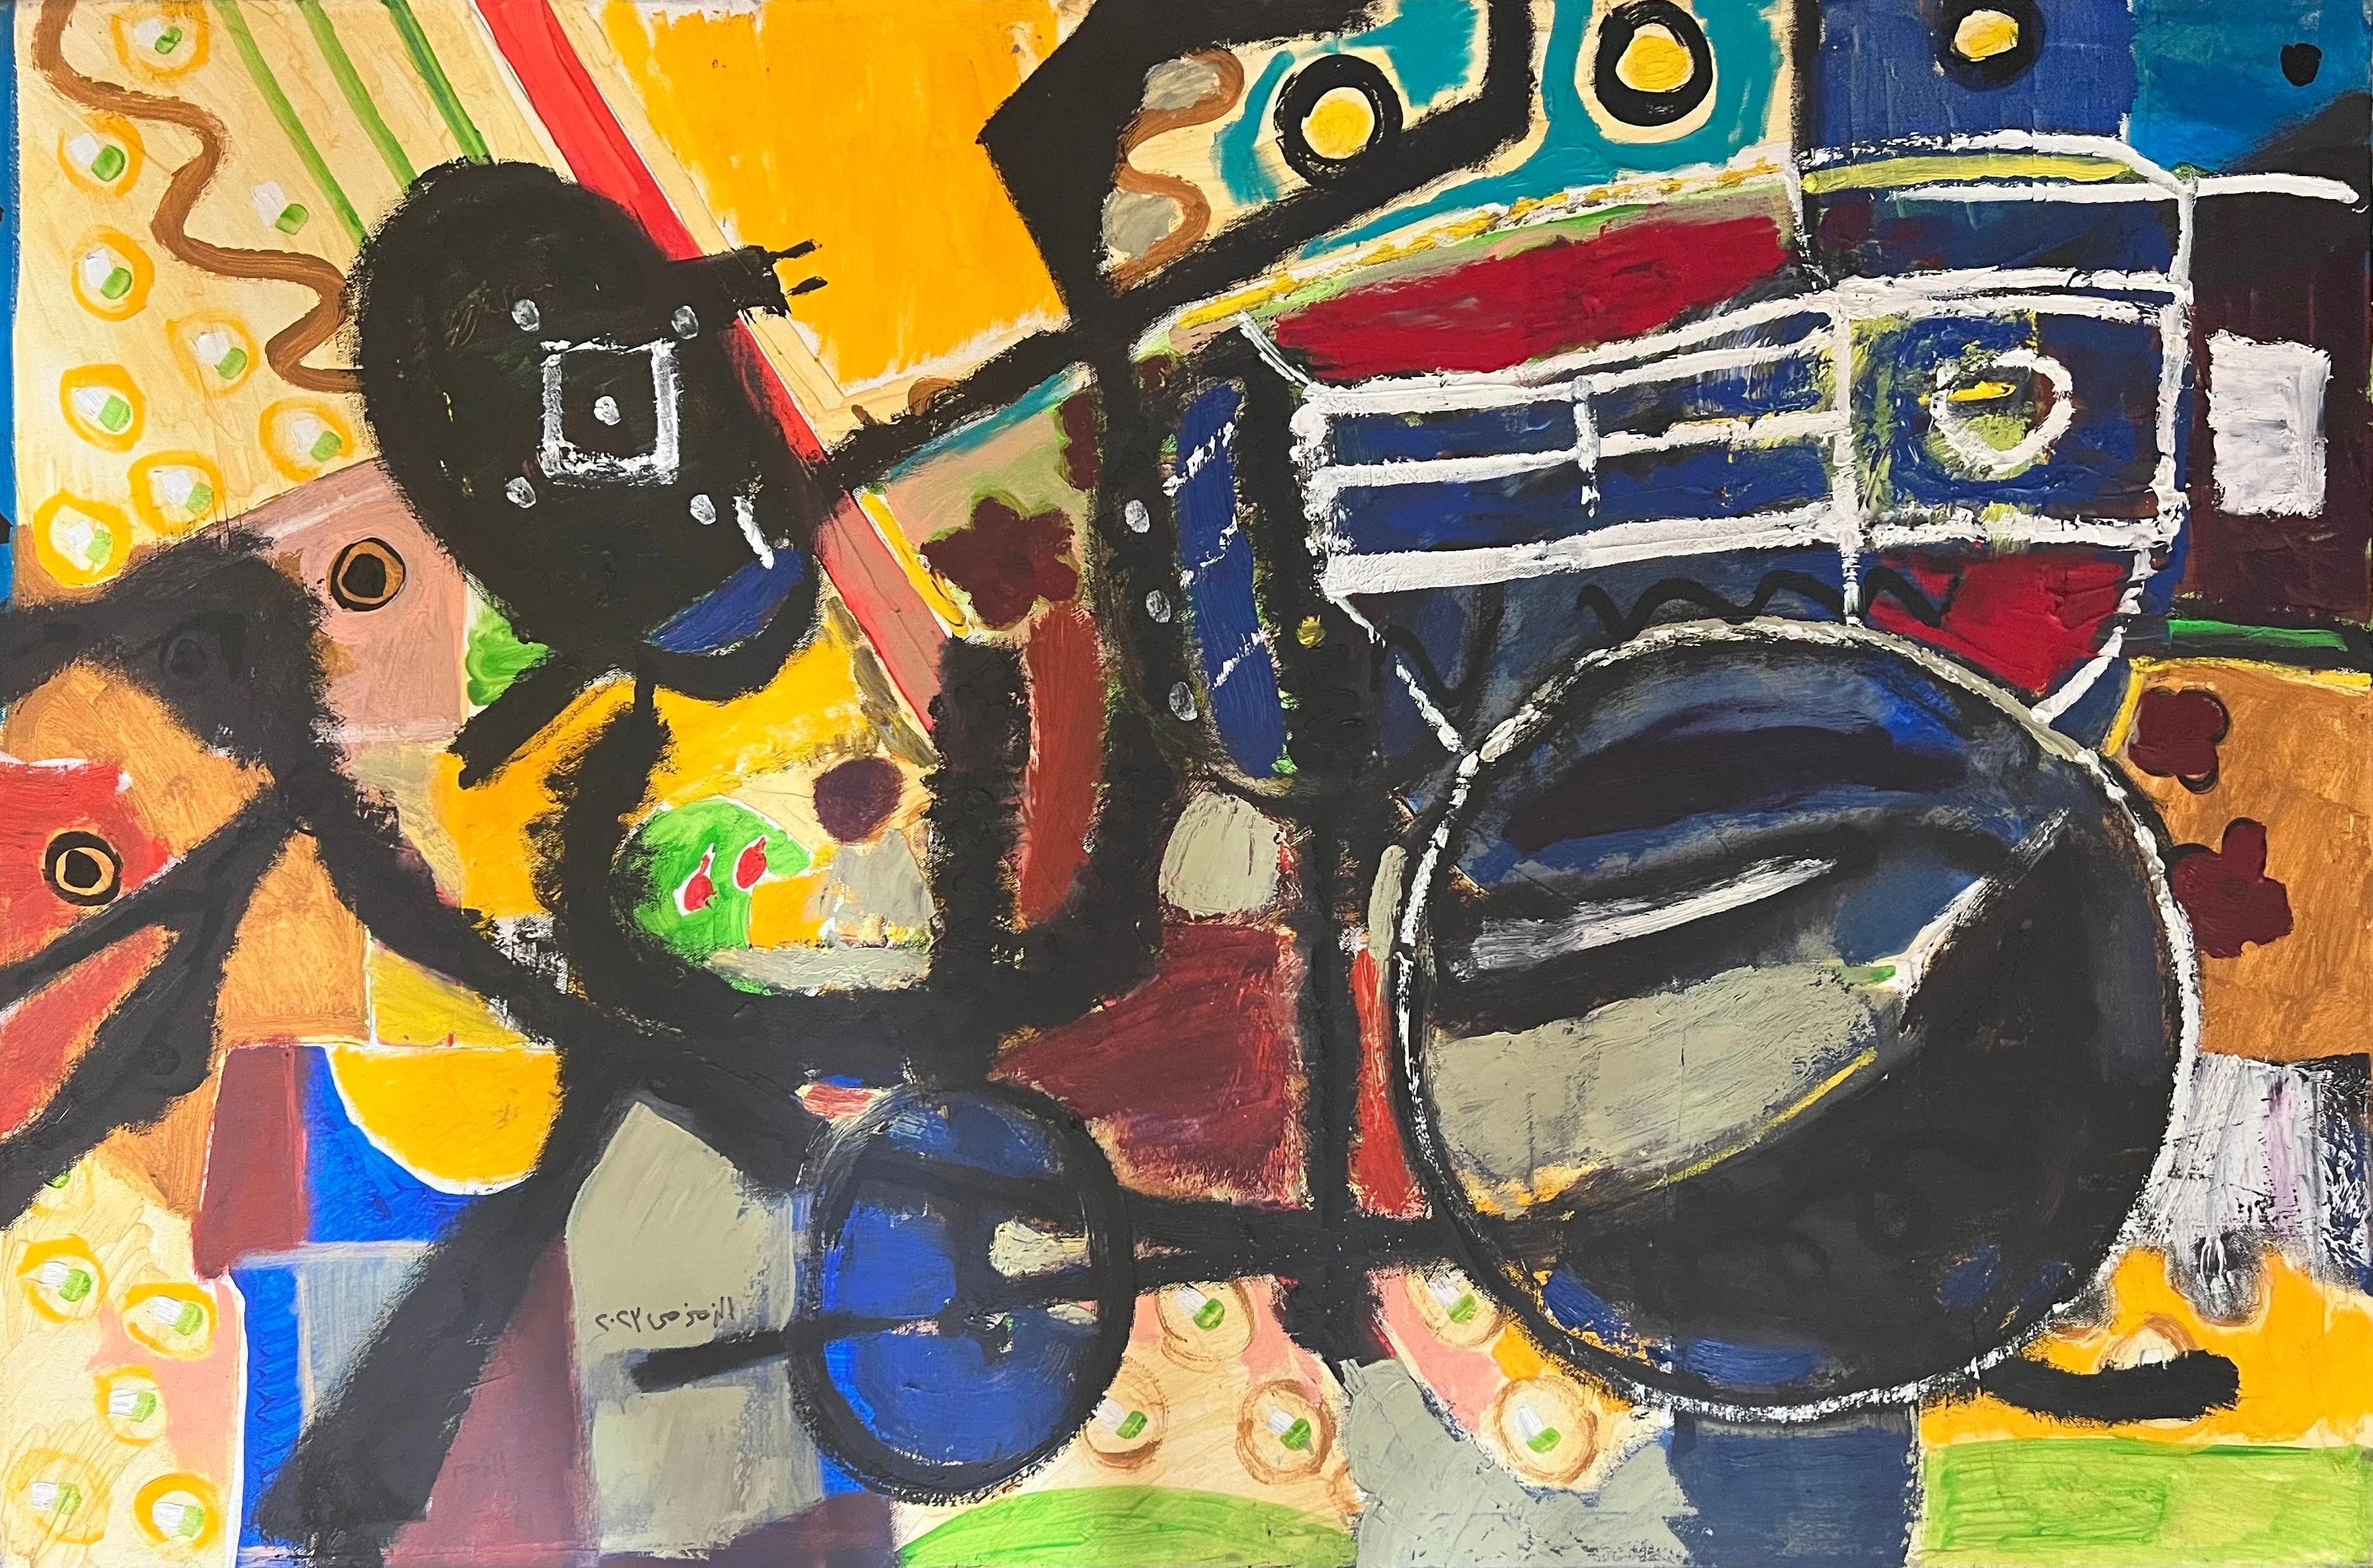 "Orbit II" Abstract Oil Painting 32" x 47" inch by Ashraf Zamzami

Ashraf El Zamzami was a graduate of the Academy of Fine Arts in Minya, and he fast made a name for himself in the local art scene in the mid-1990s with his palpably naive yet refined